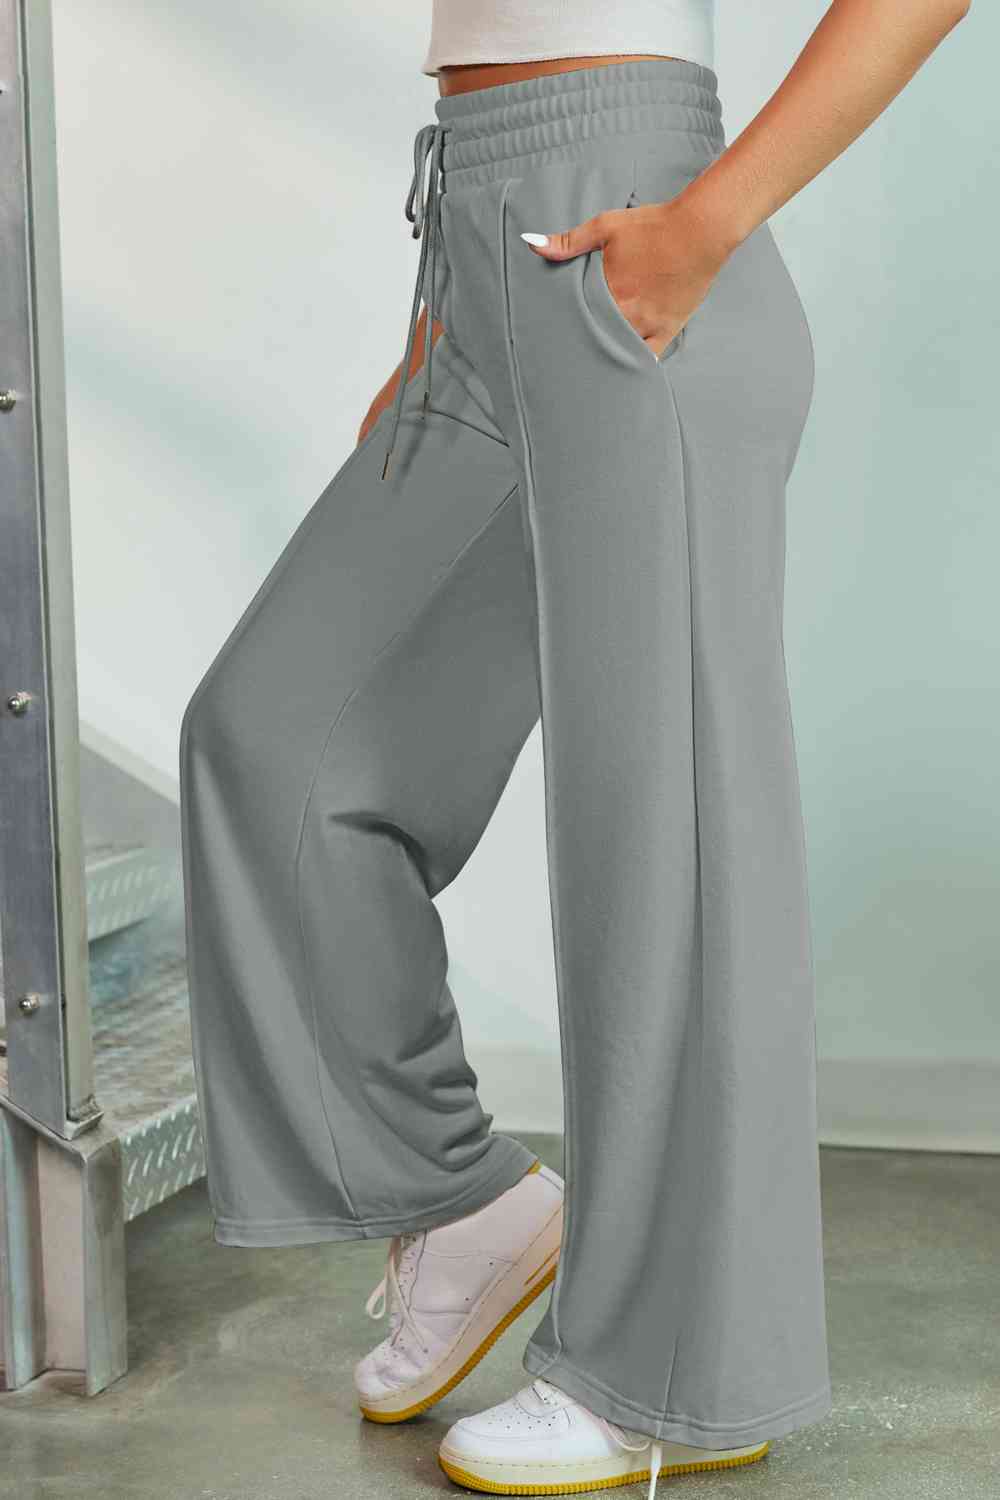 a woman wearing grey pants and a white tank top